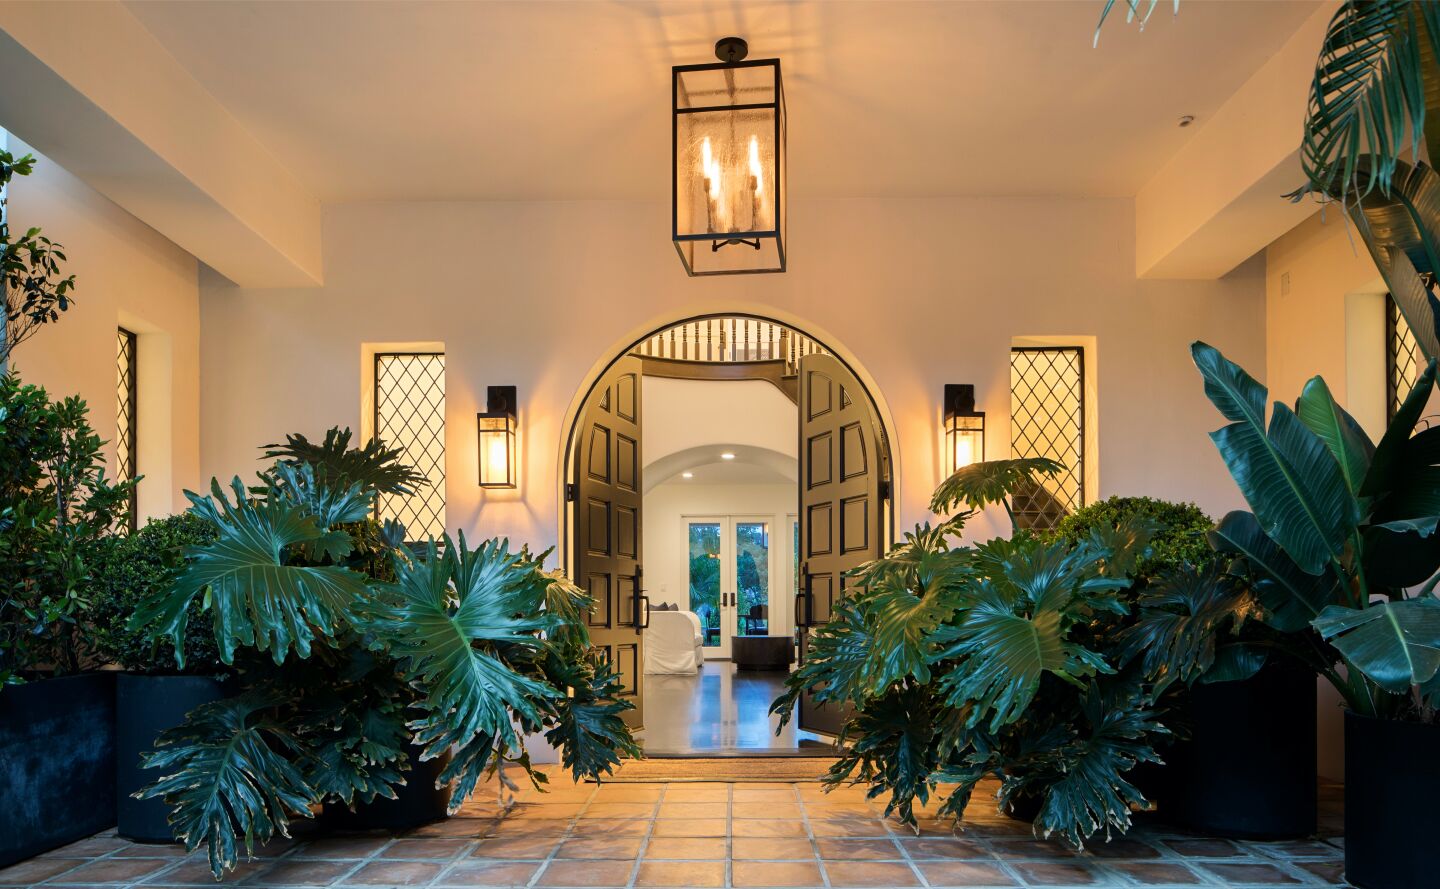 High-ceiling entry with archway, greenery and lighting.